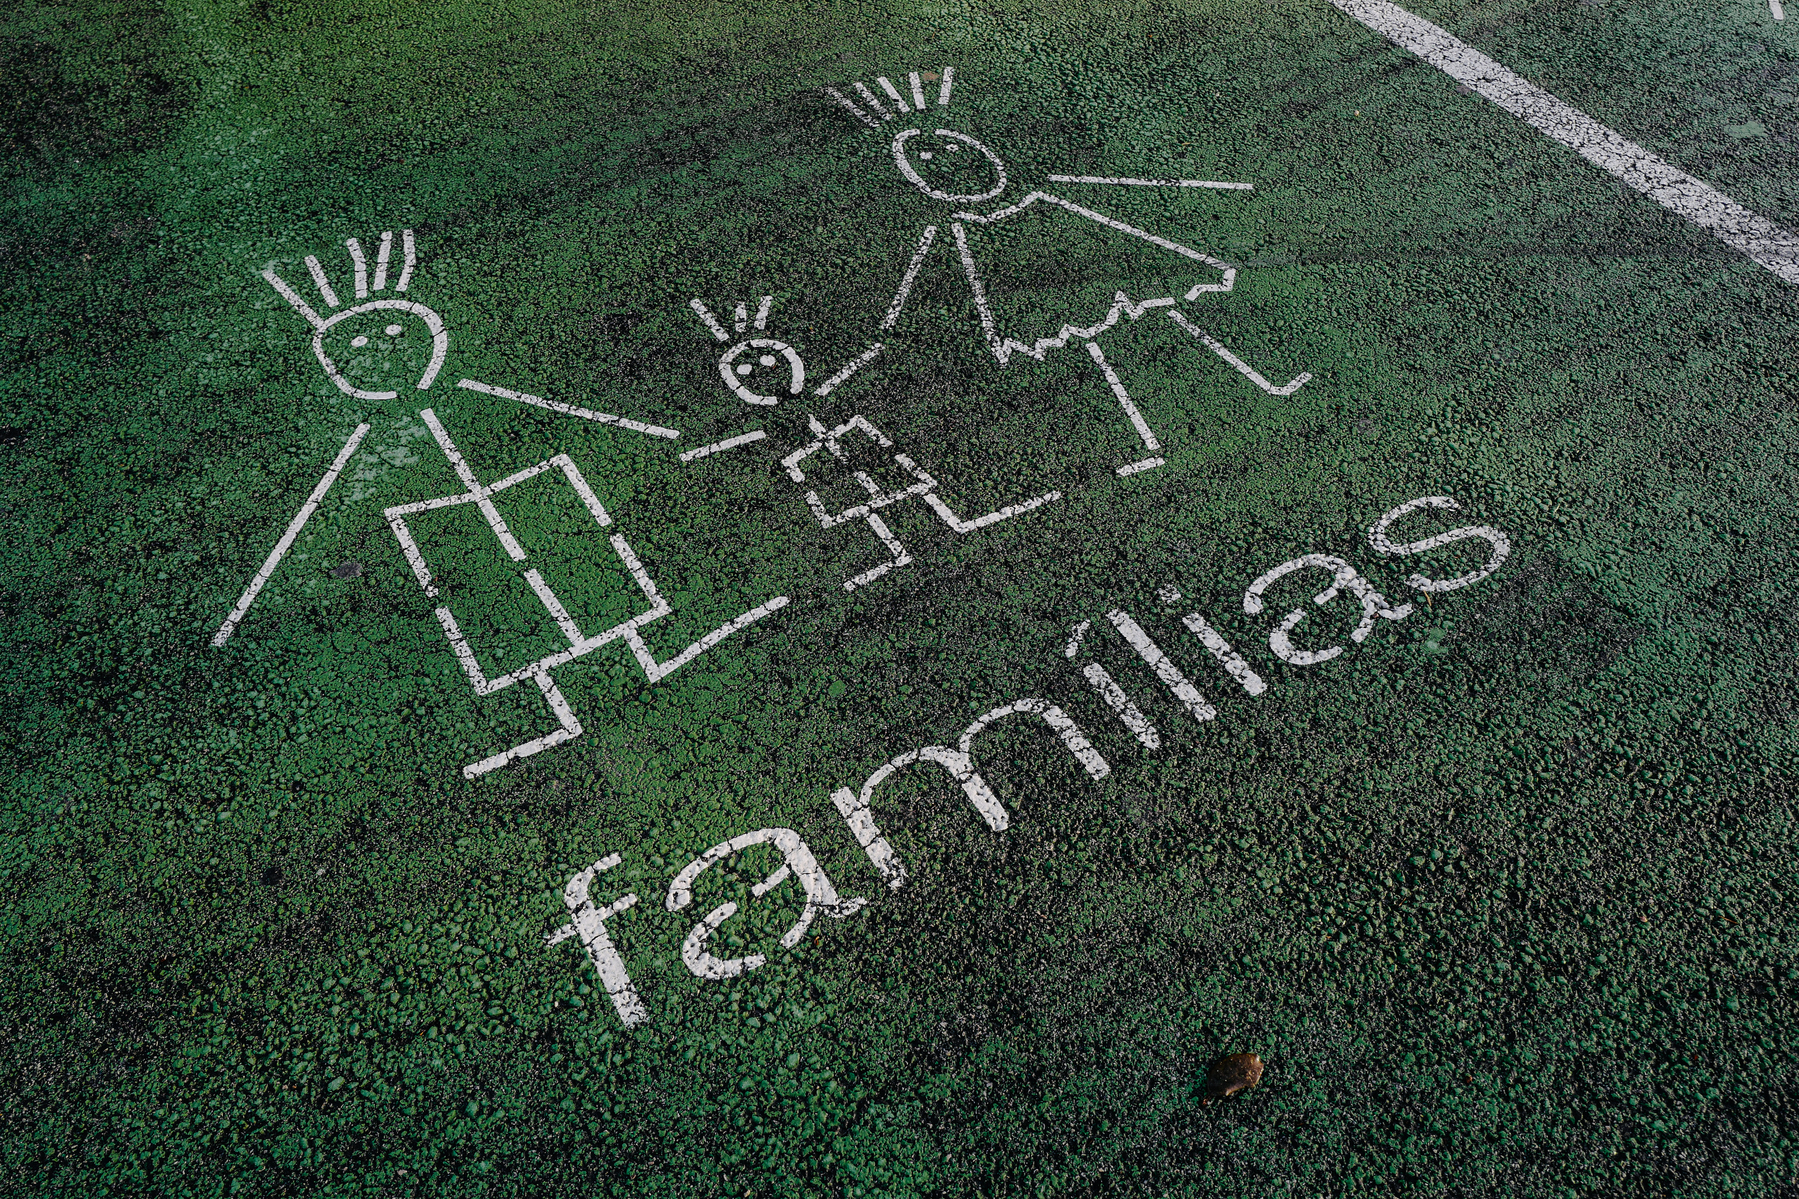 Painted symbols of a family with one adult and two children on a green textured ground with the word &ldquo;families&rdquo; written below.